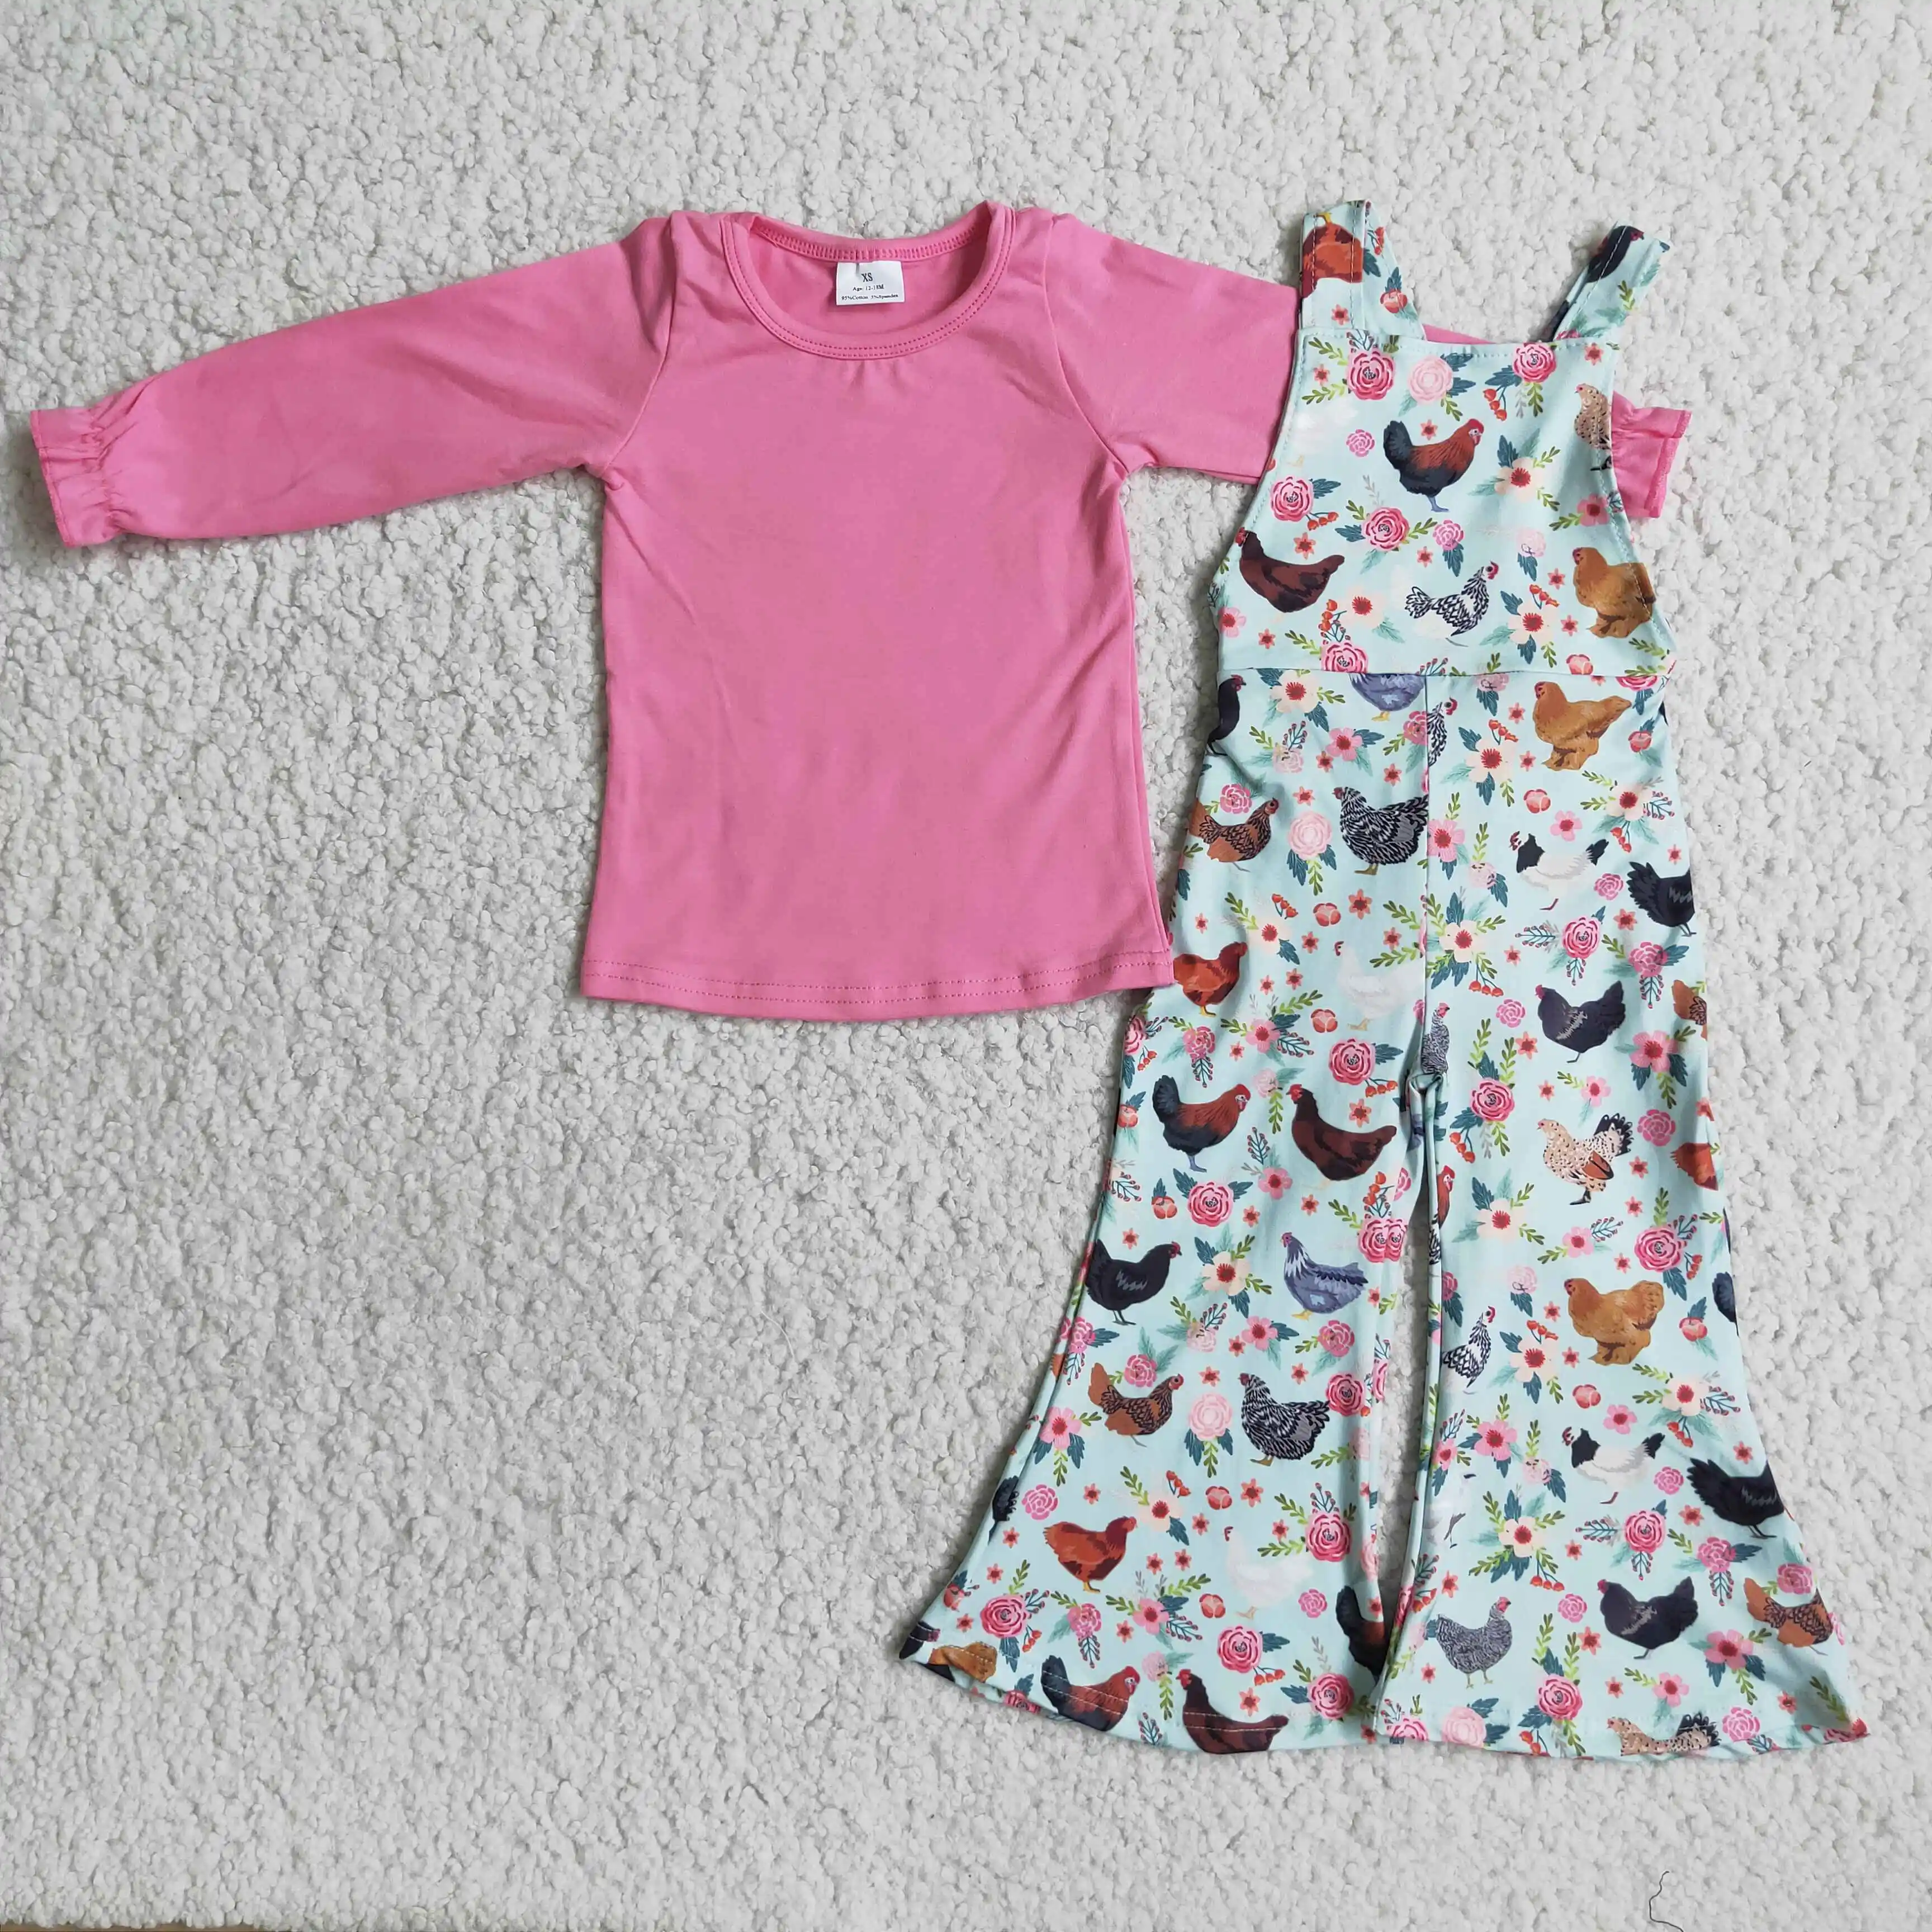 

Little Girls Farm Chicken Outfits Pink Overalls Kids Long Sleeves Top Floral Pants Children Clothing Boutique Sets Hot Sale